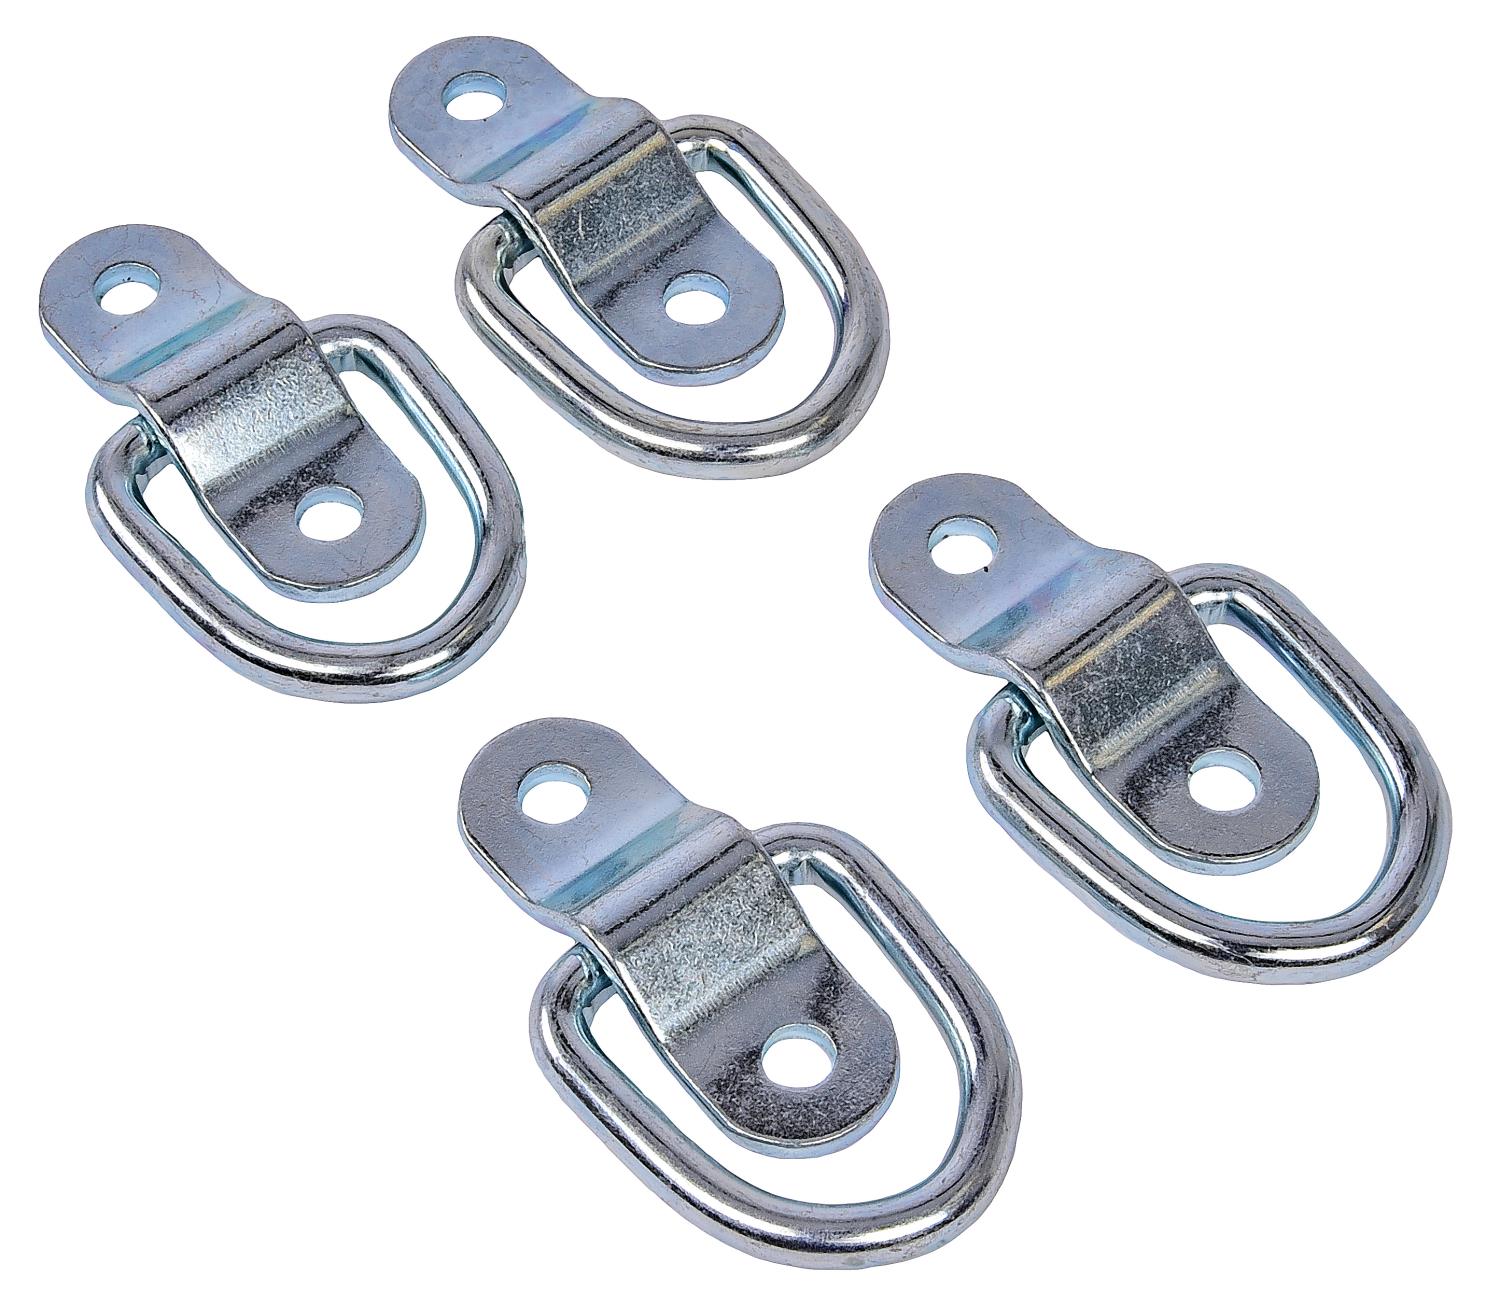 D-ring Recessed Trailer Tie Down Anchor Hooks - California Car Cover Company